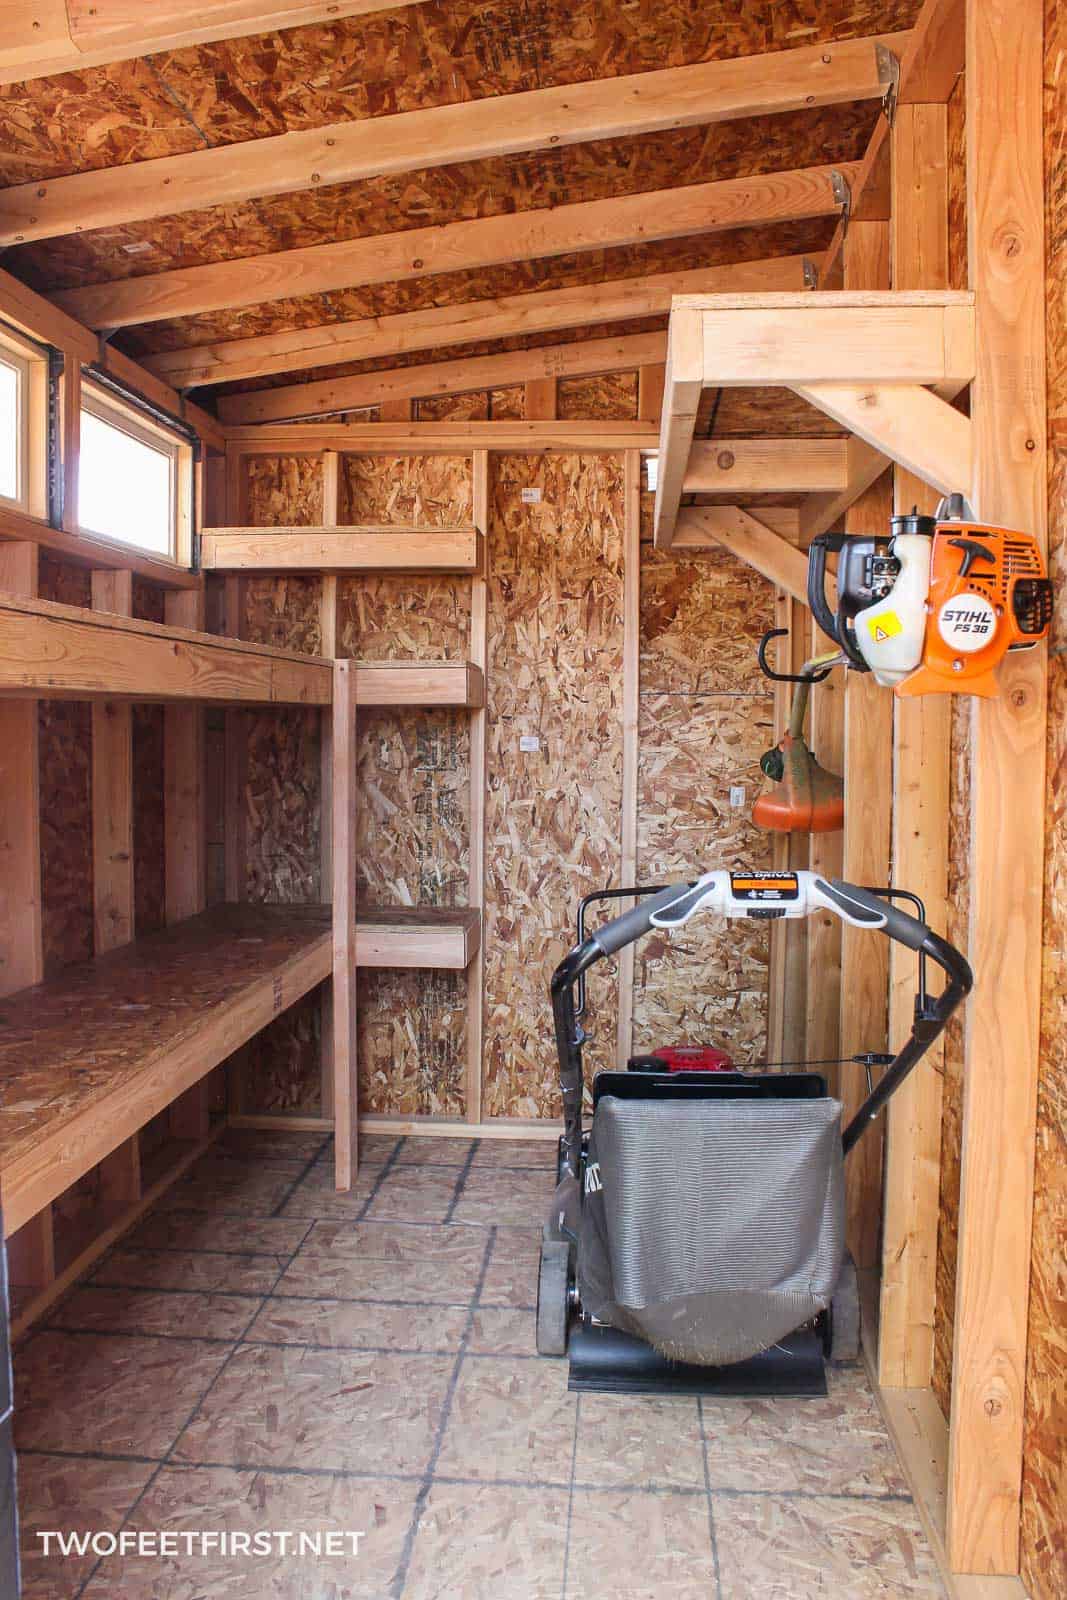 How to build storage shelves in a shed or garage